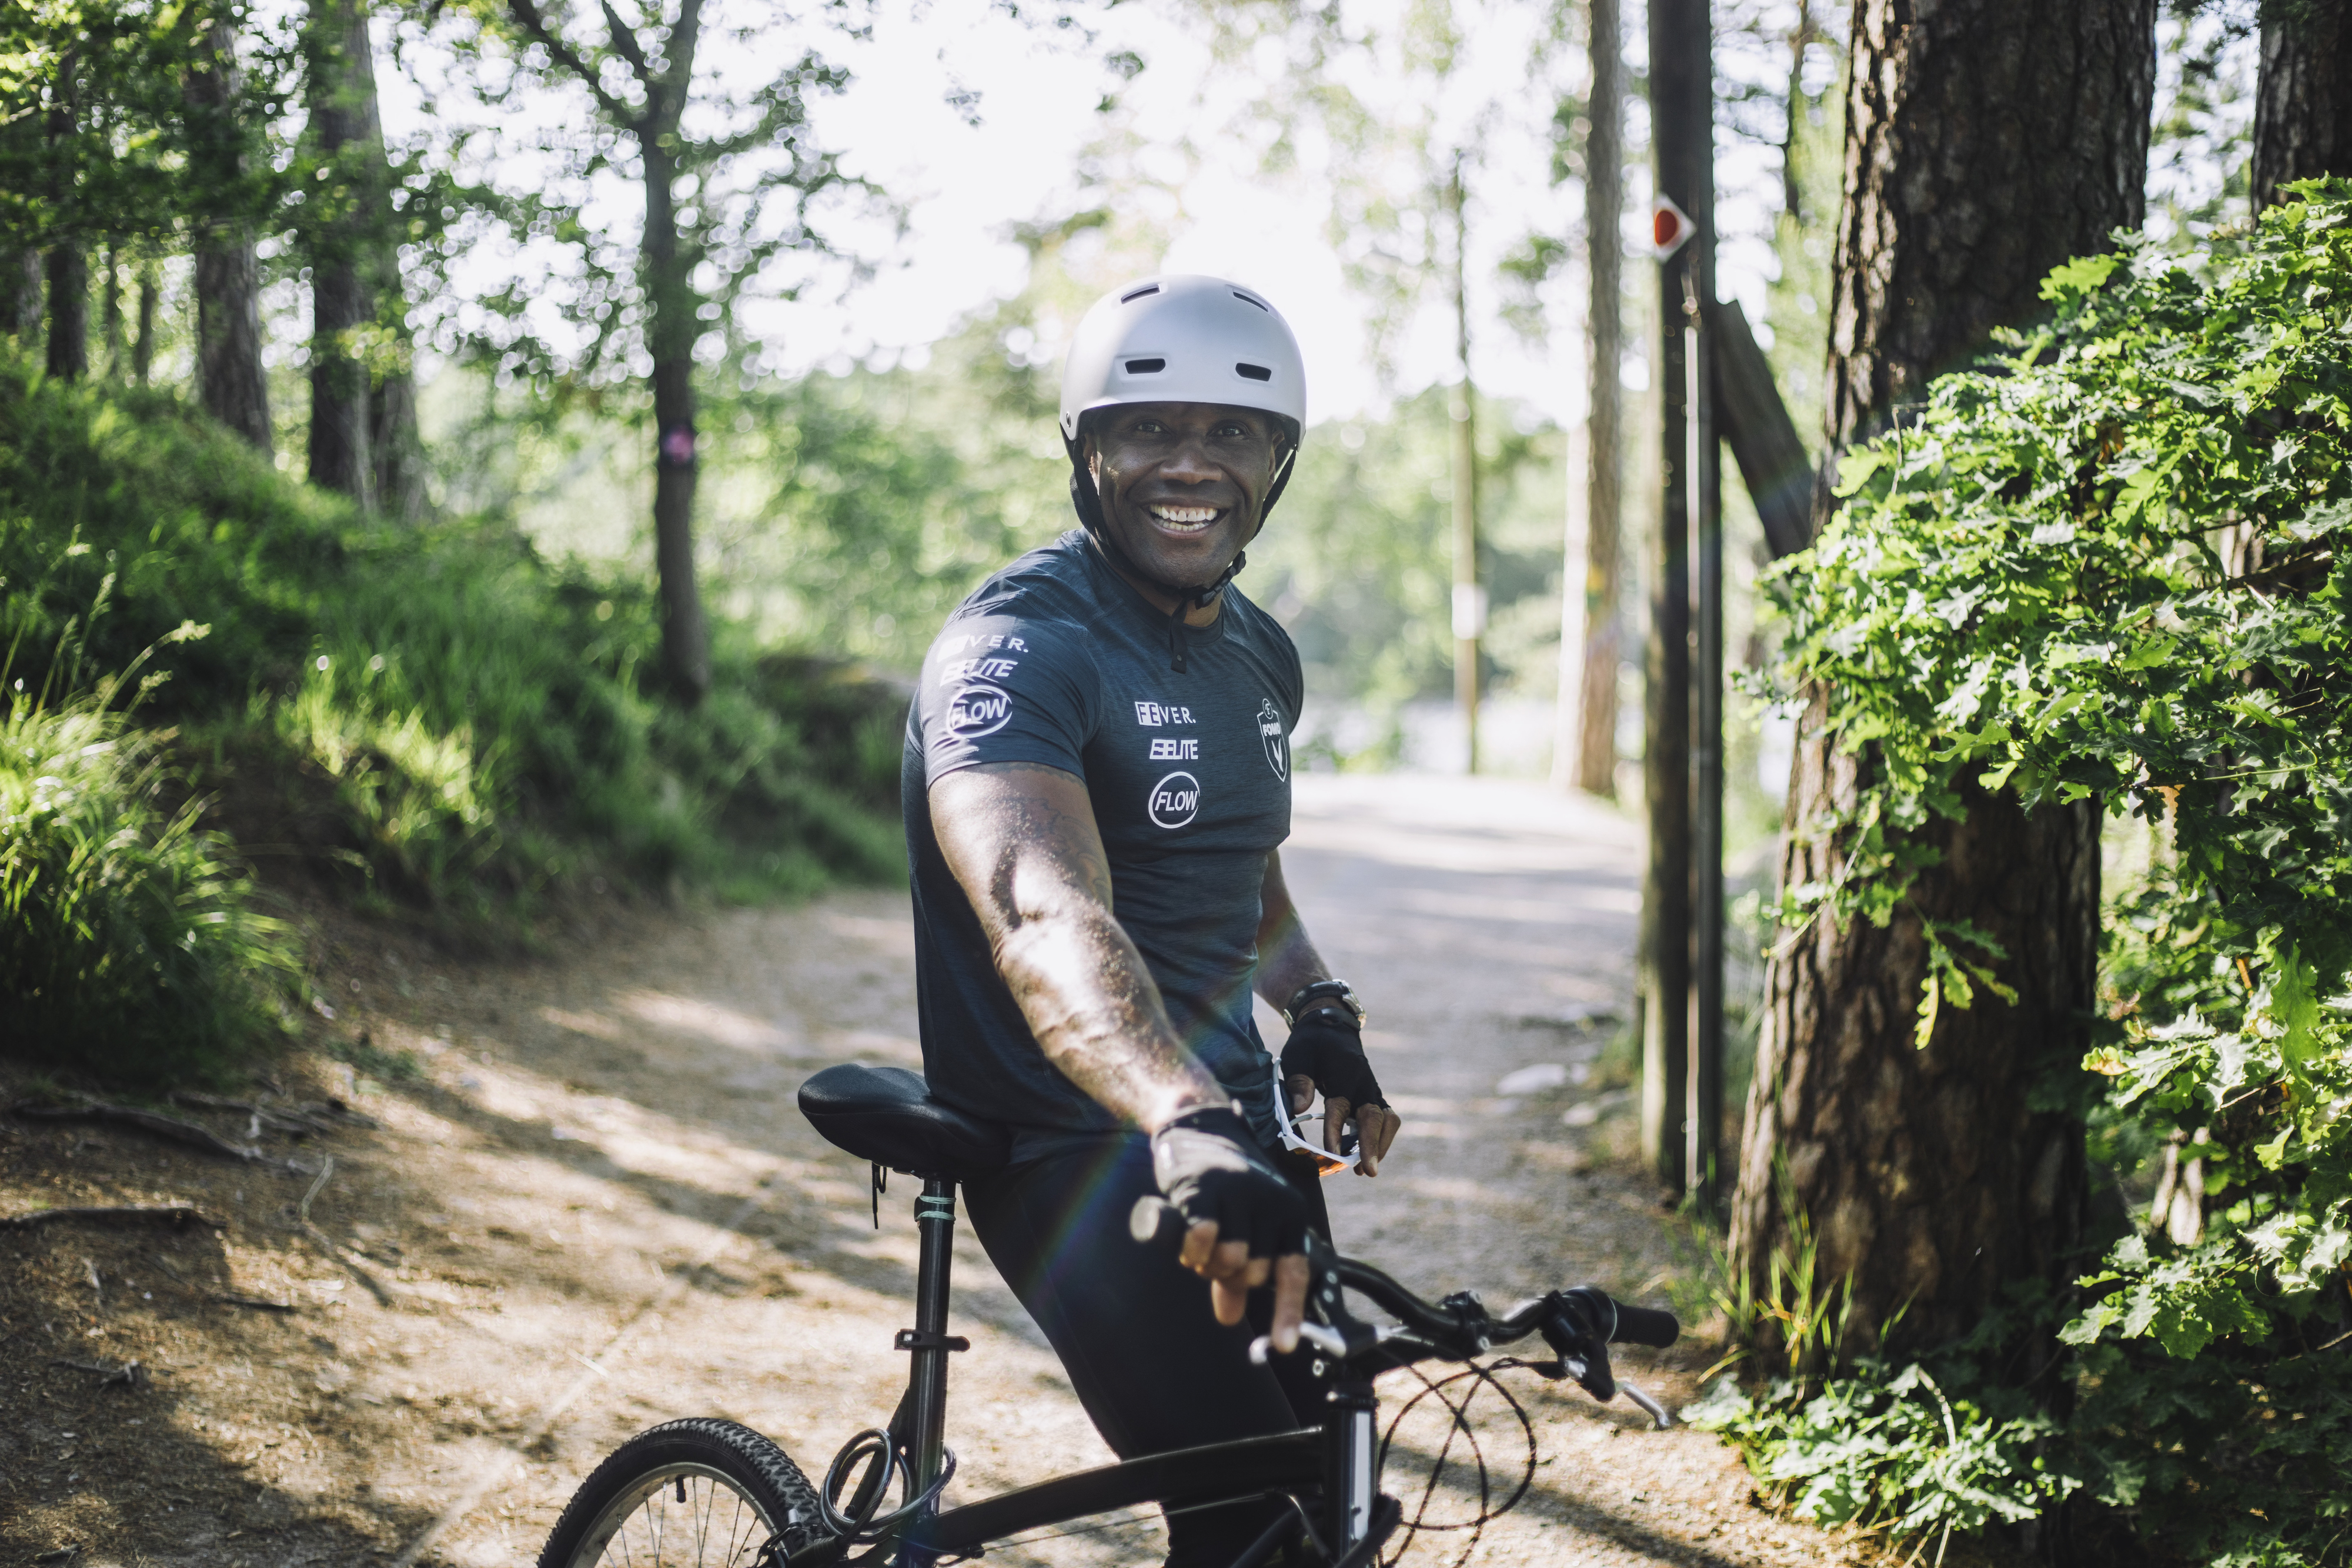 Person with helmet sitting on a bike, smiling, on a forest path